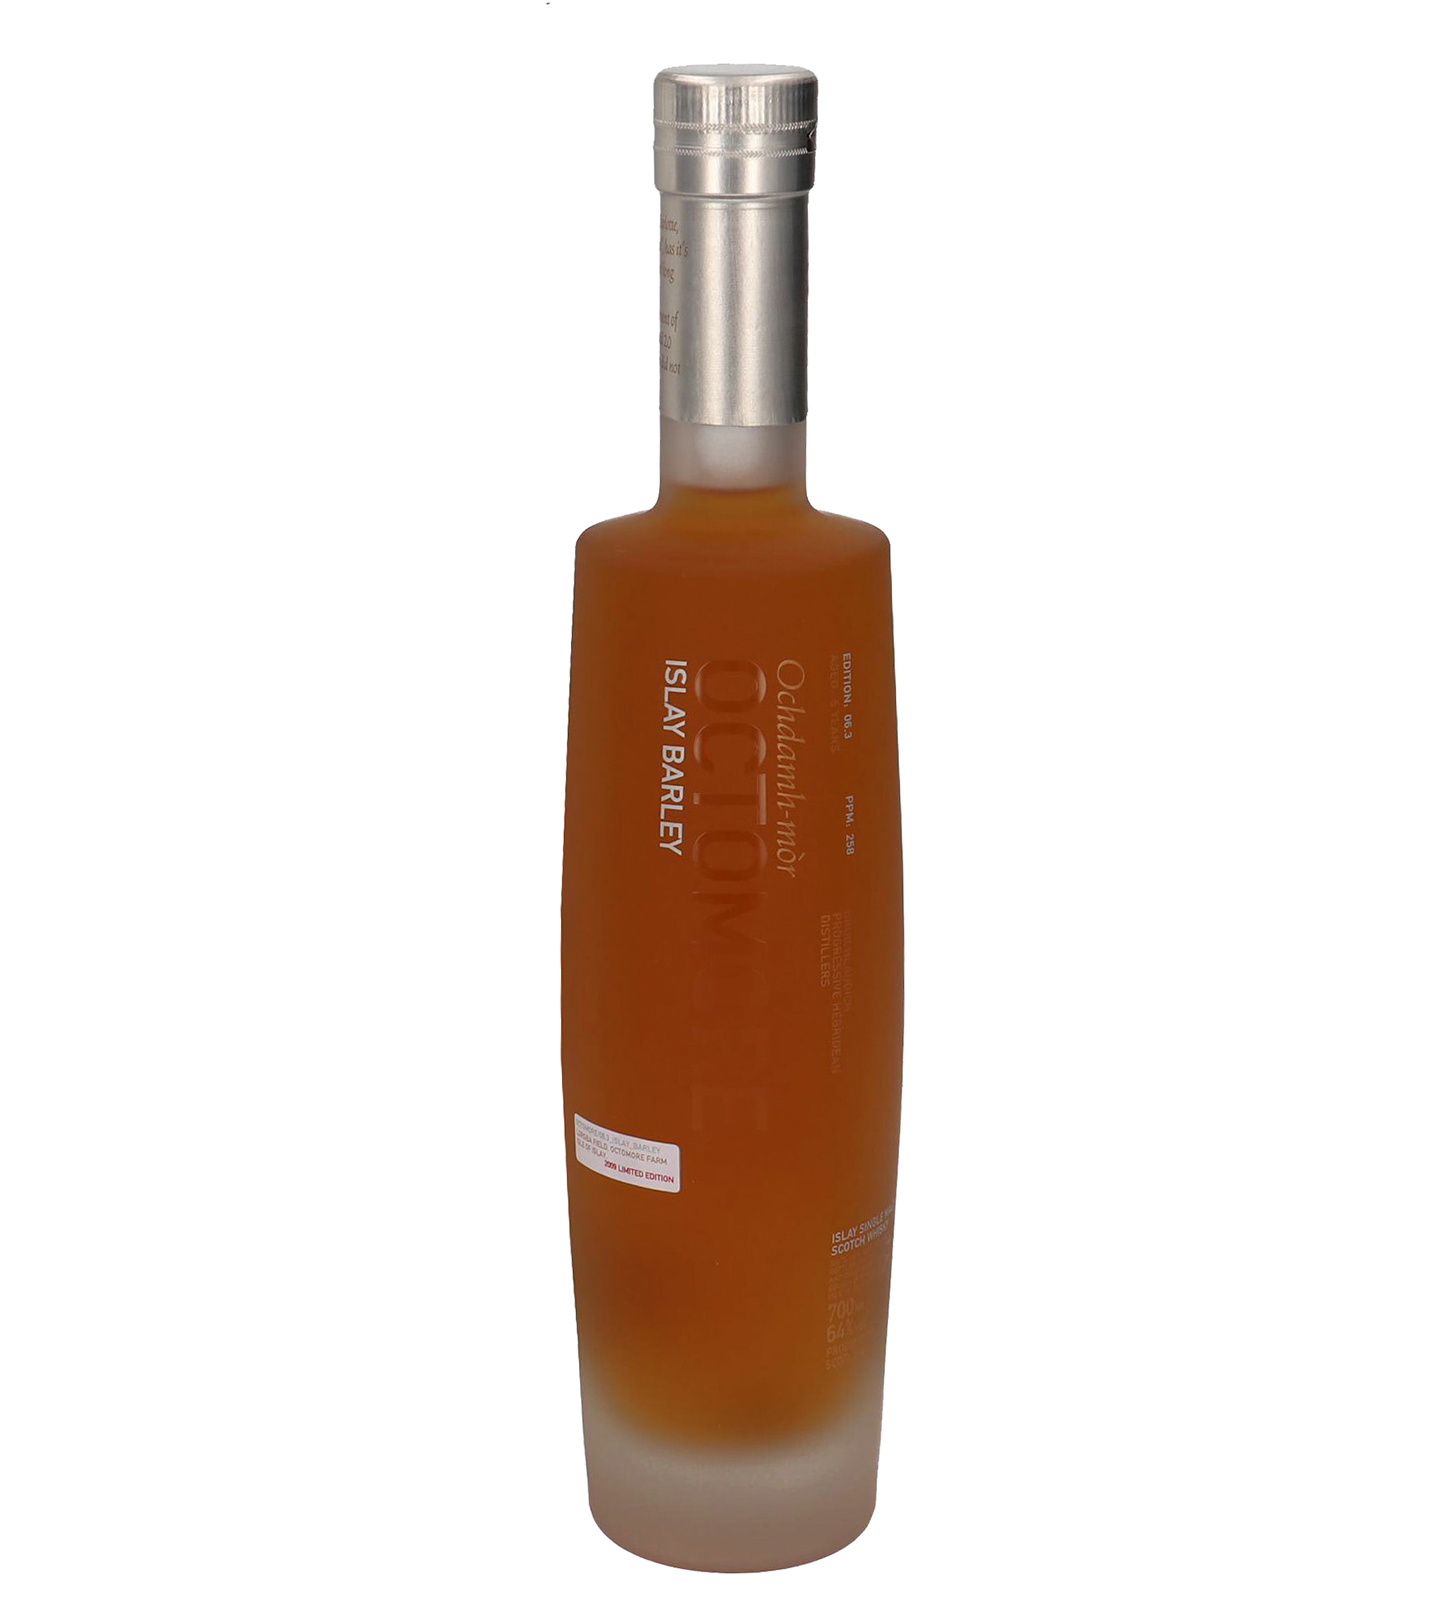 You are currently viewing Octomore 06.3 5 years